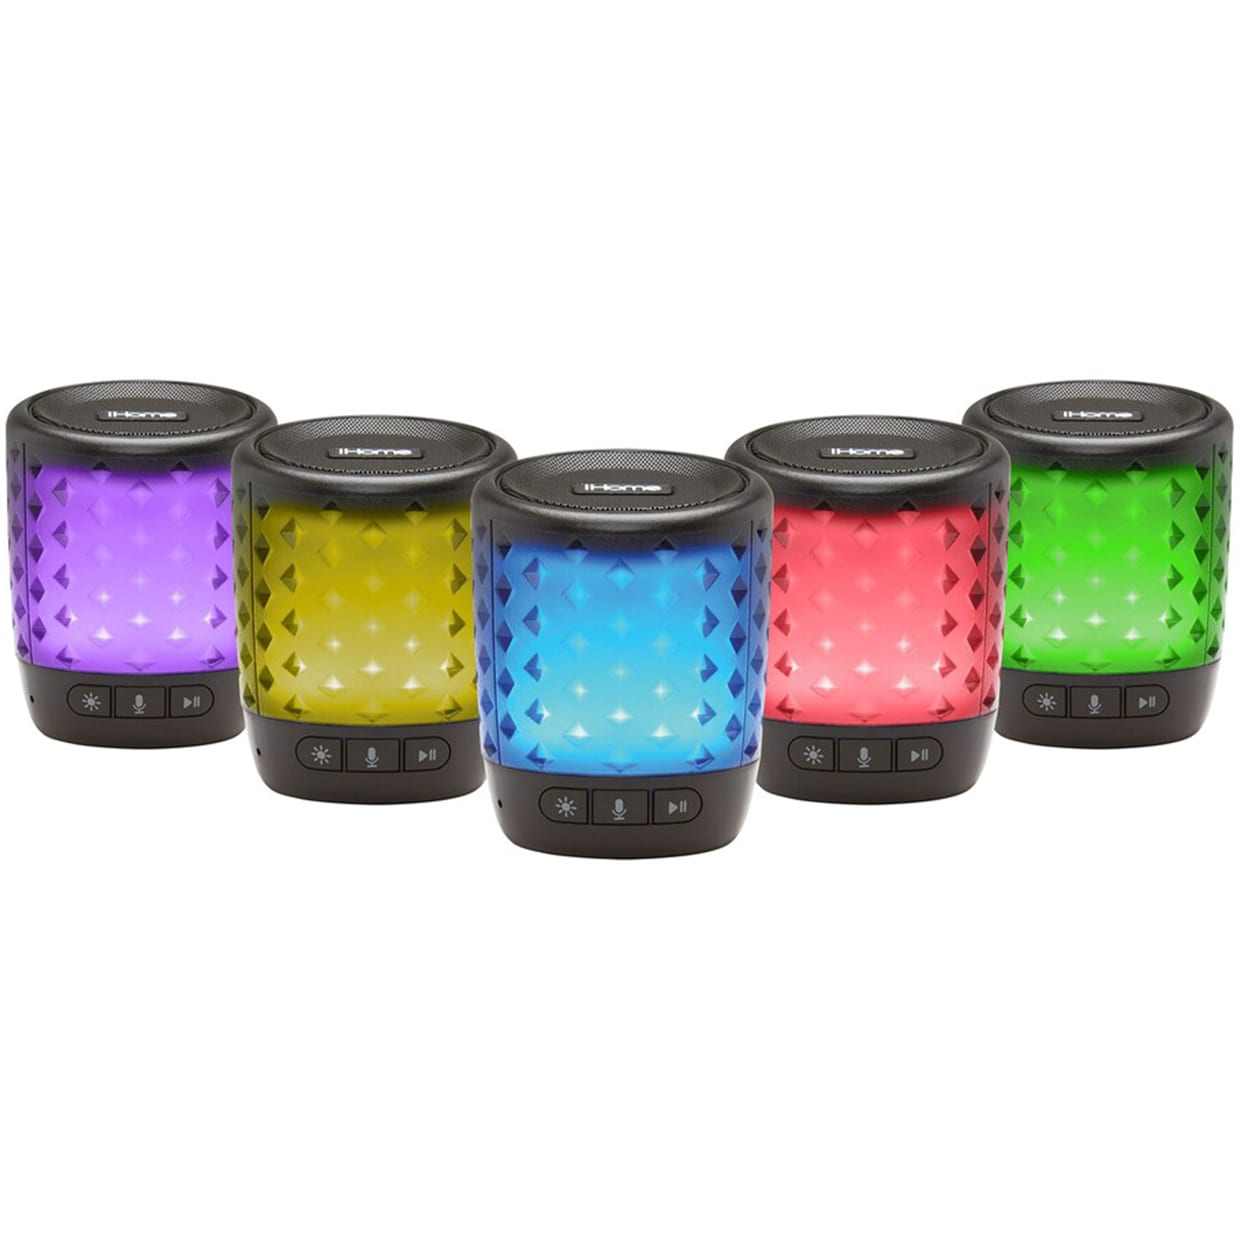 Five bluetooth speakers light up in purple, yellow, blue, red and green.